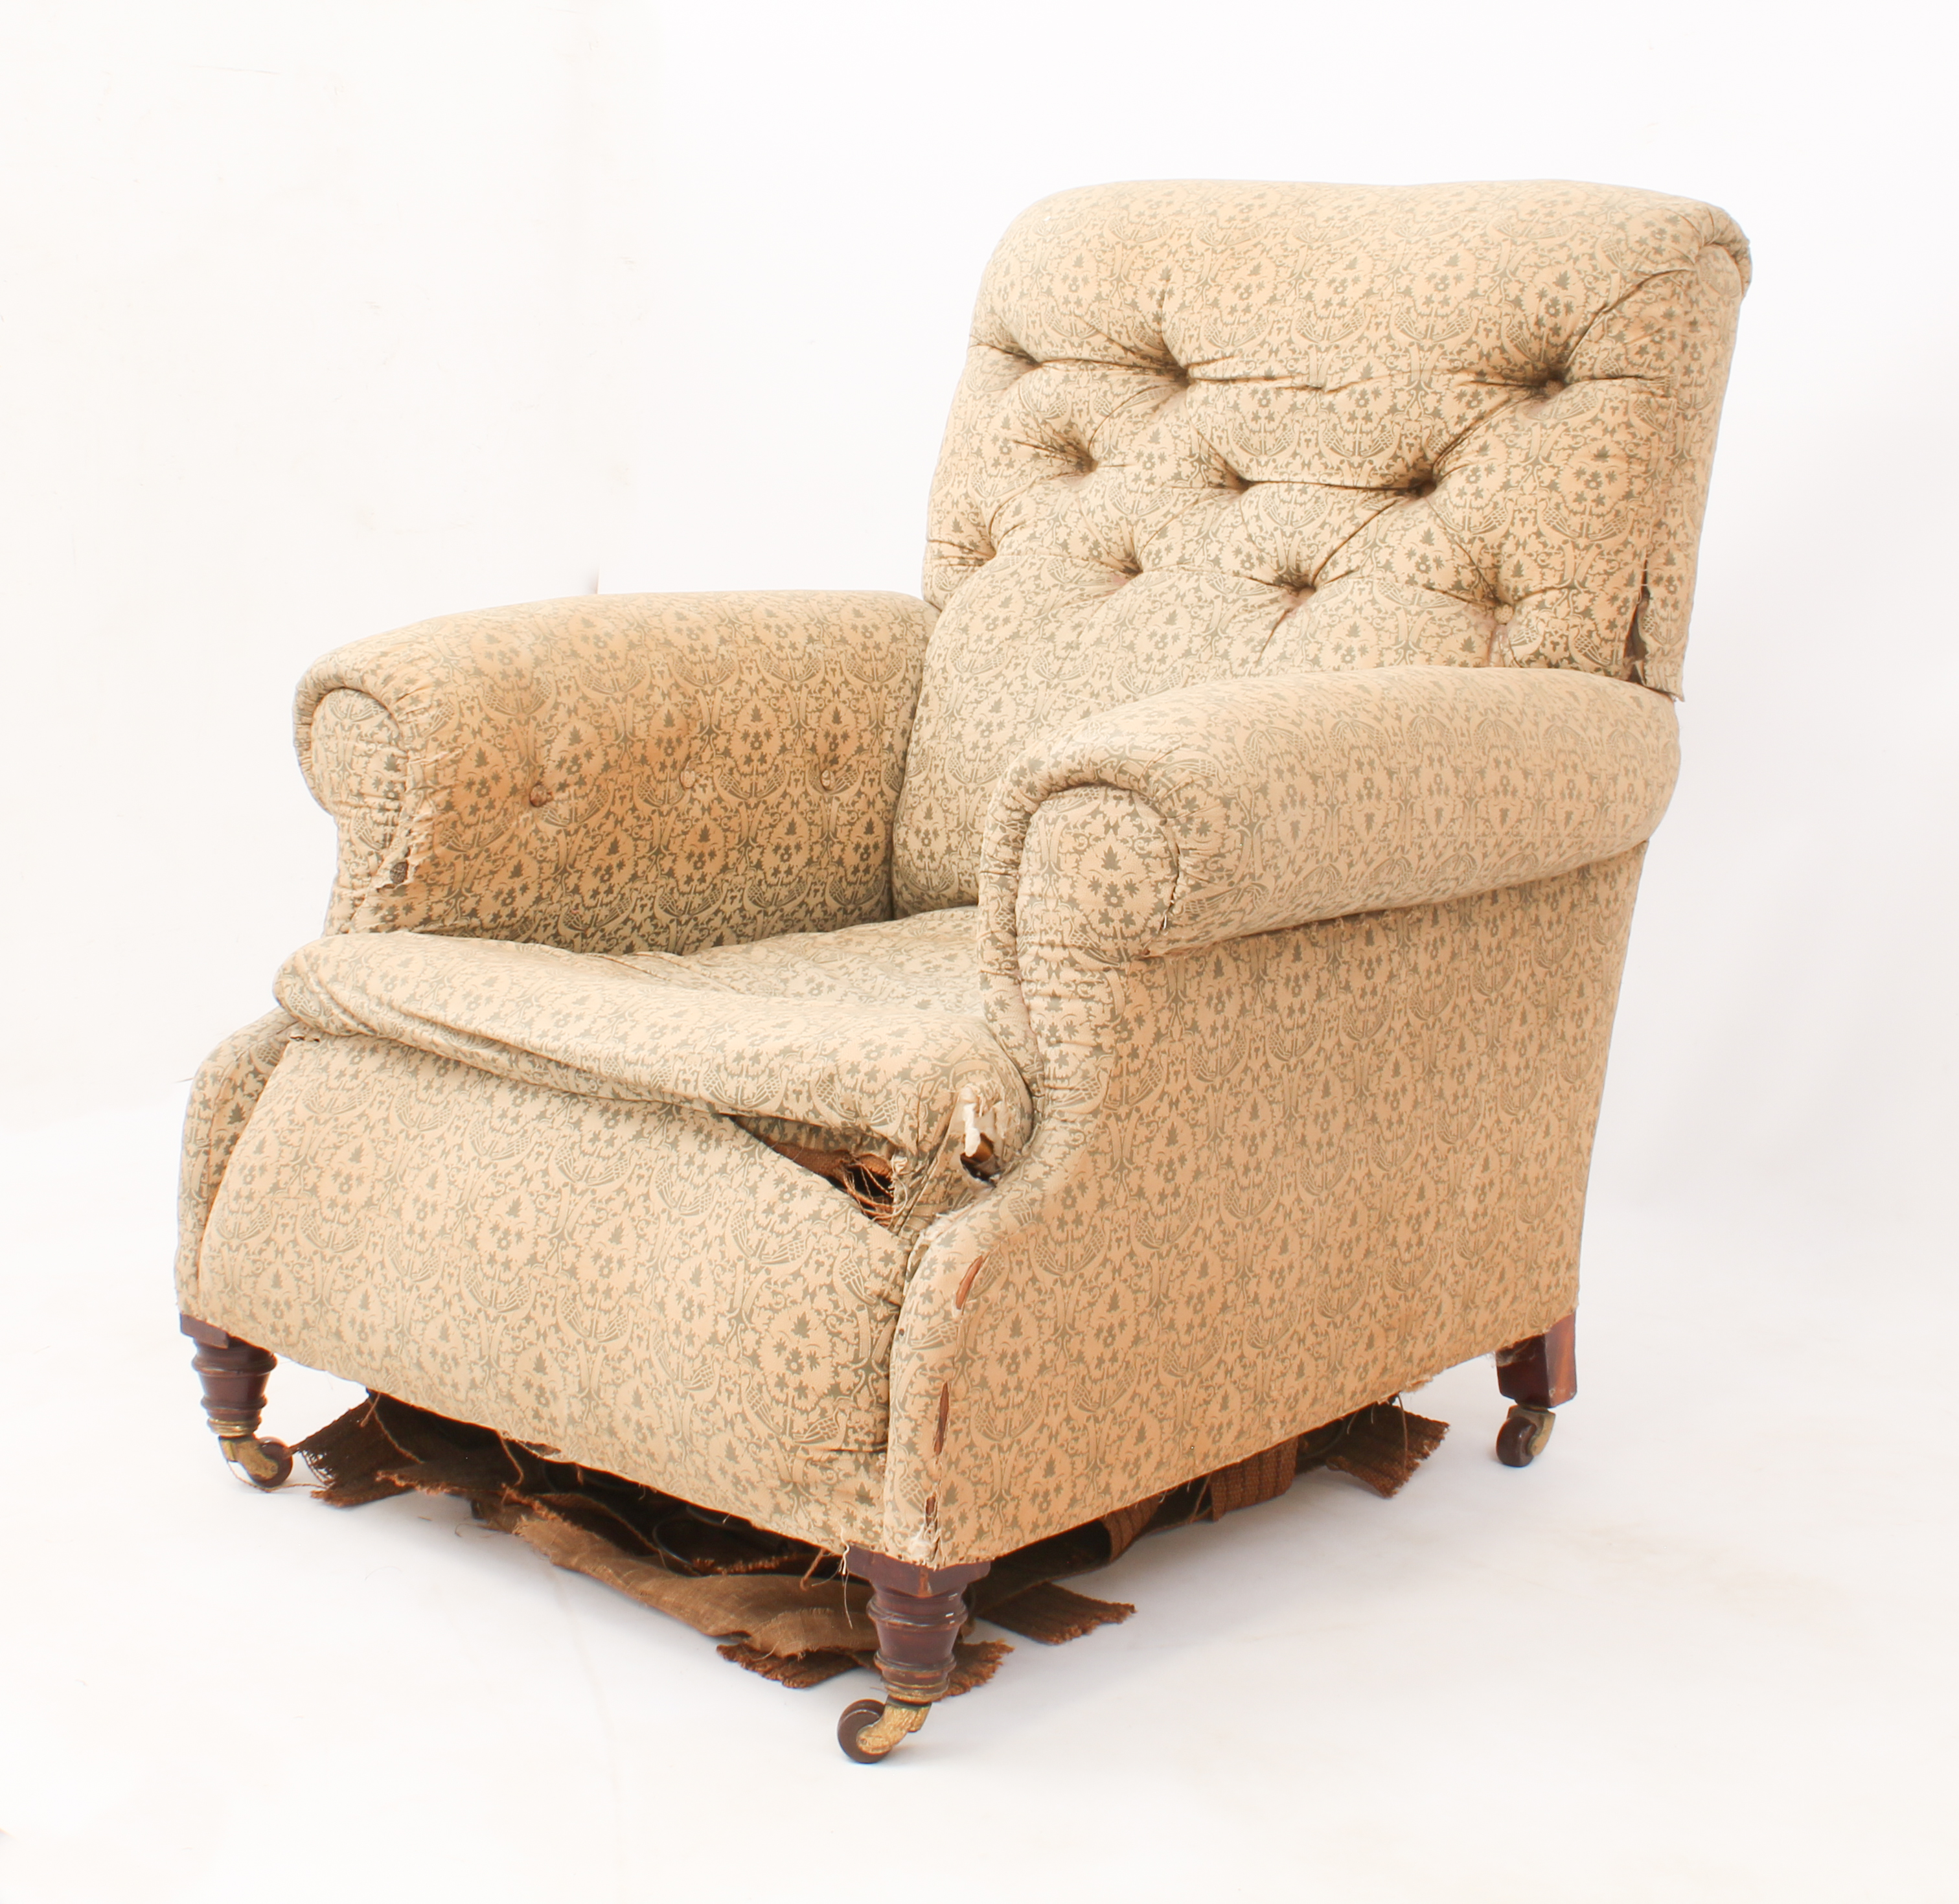 A late 19th / early 20th century Howard-style armchair by Hampton & Sons of London - in the original